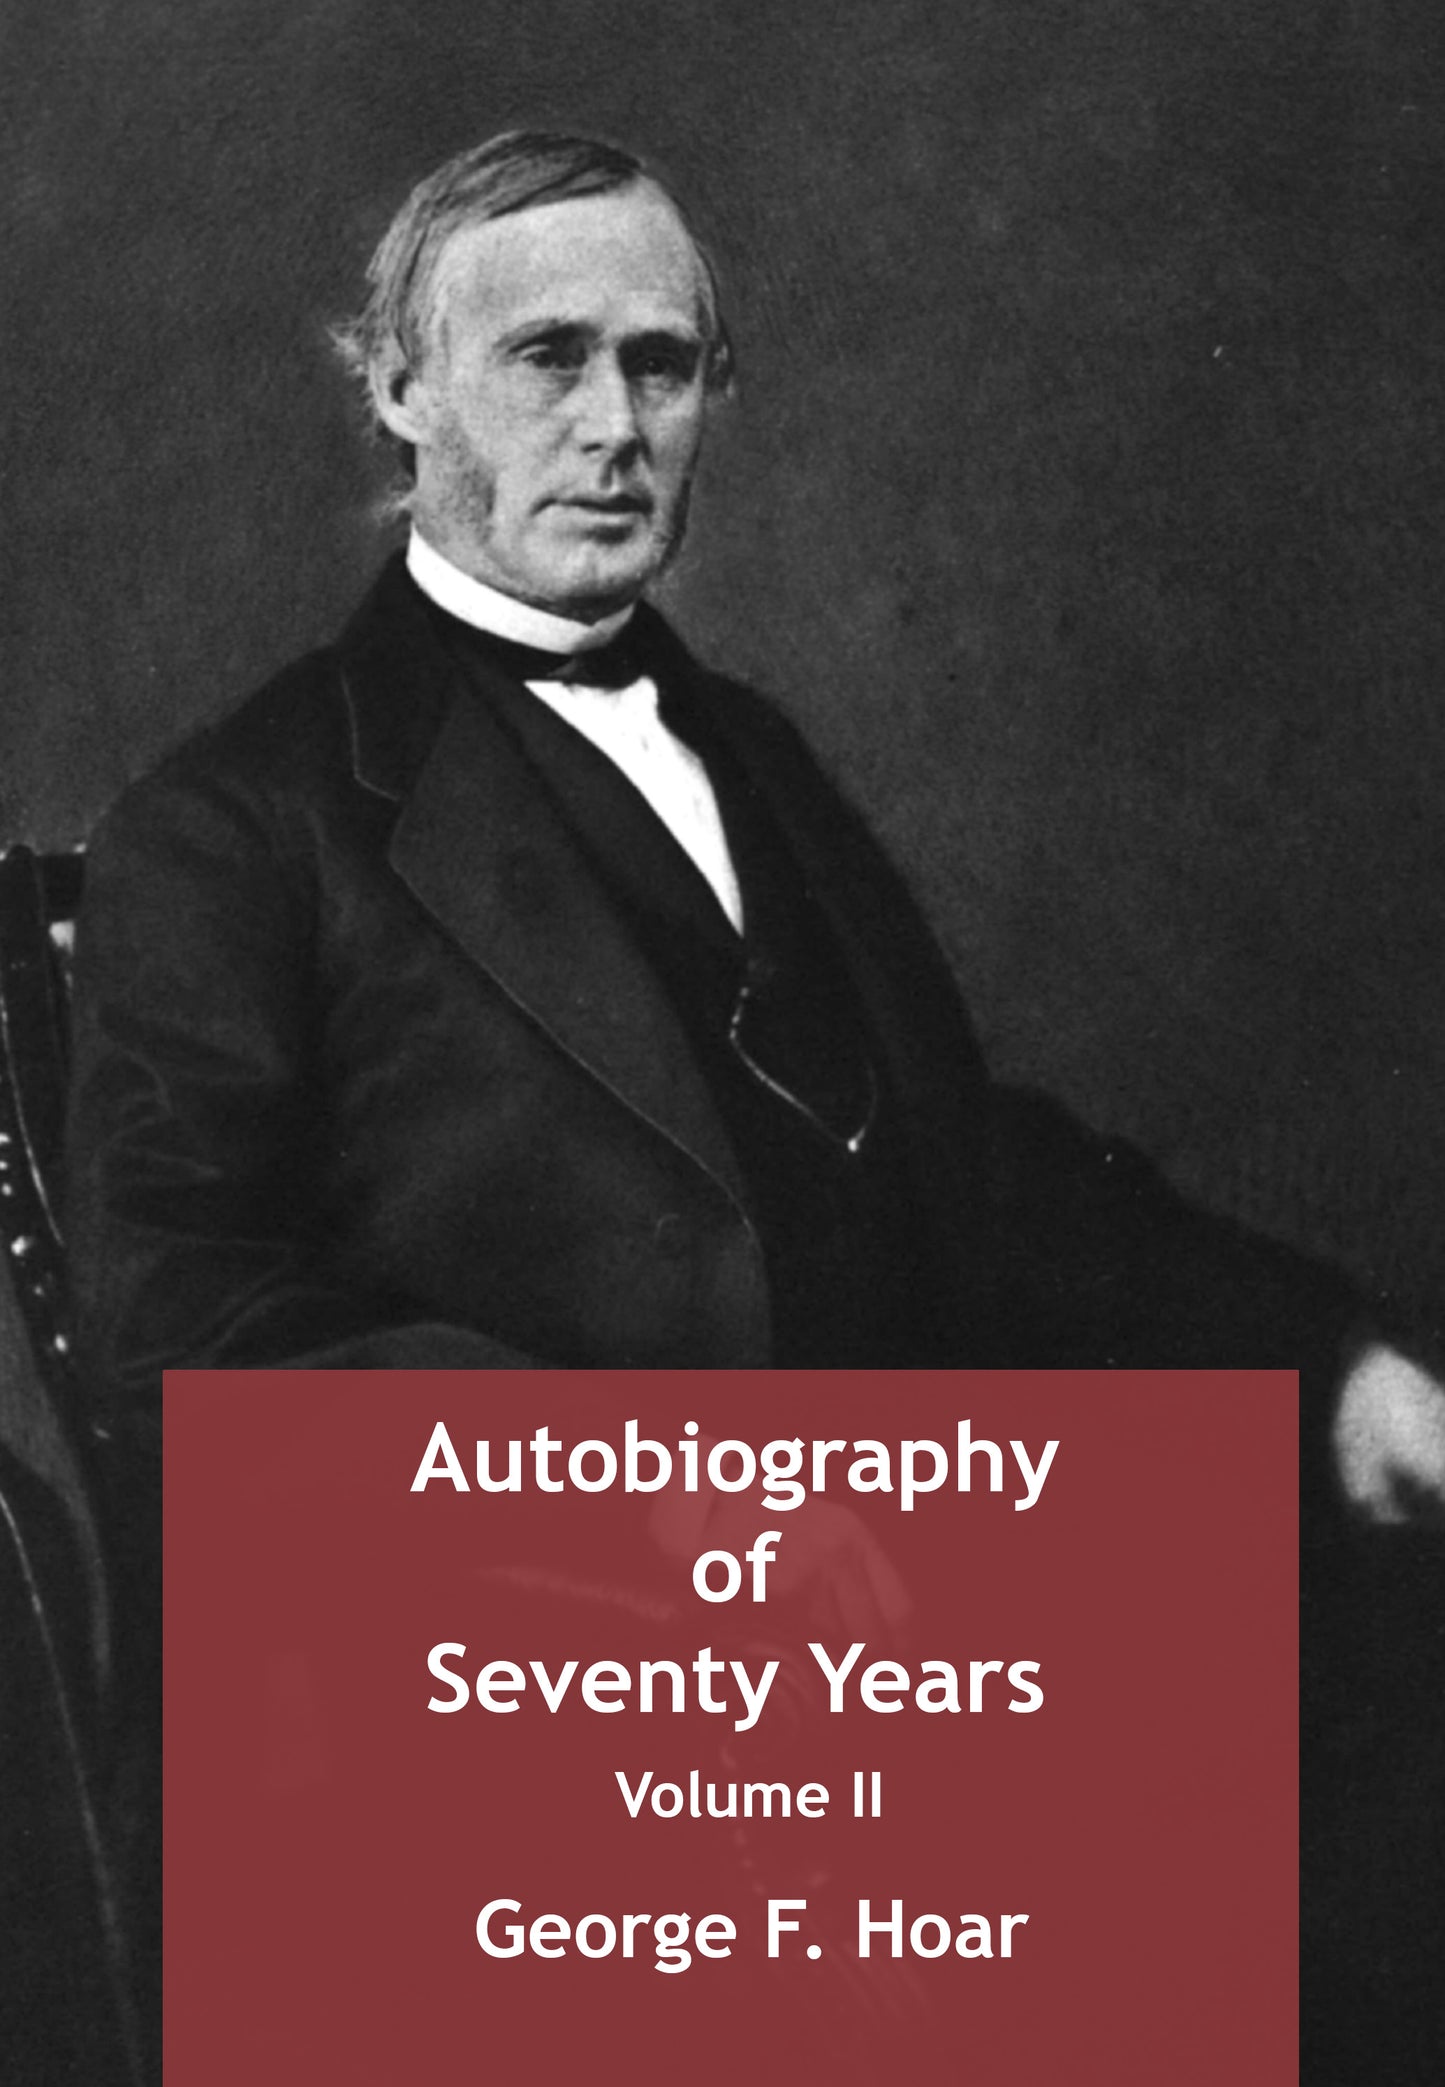 George F. Hoar - Autobiography of Seventy Years Vol. 2